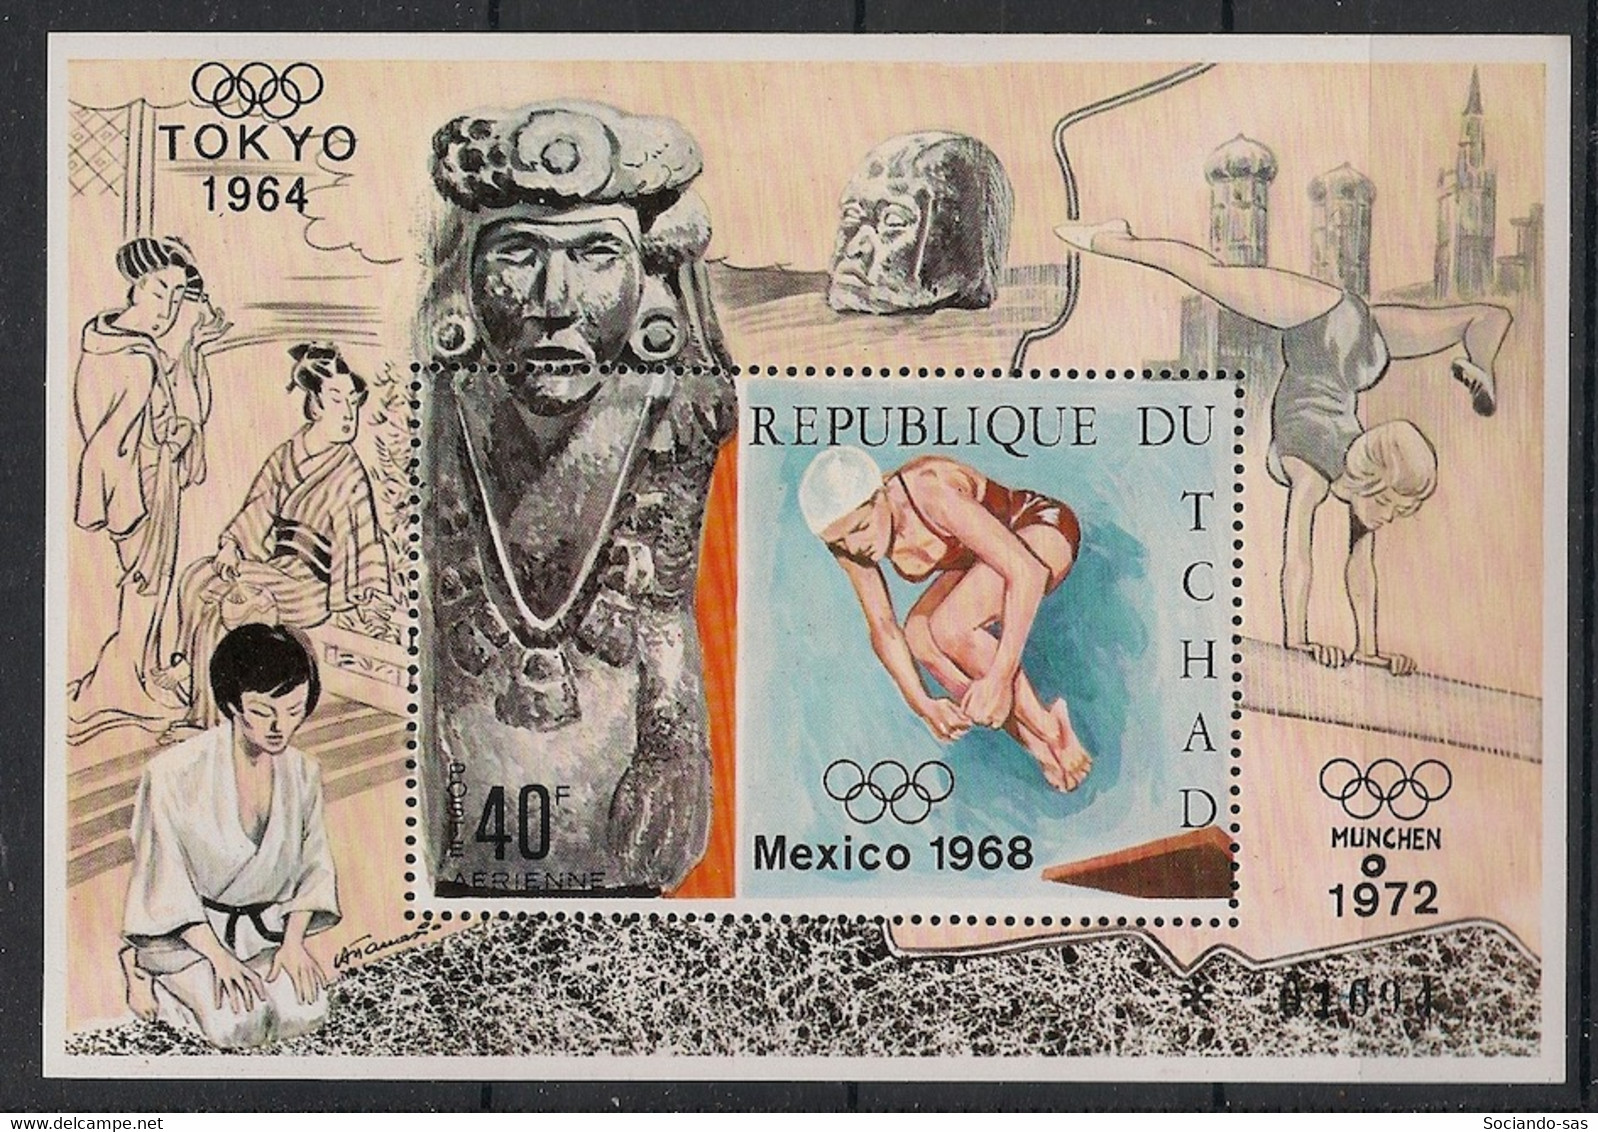 TCHAD - 1970 - Bloc Feuillet BF  N°Mi. 11 - Olympics / Mexico - Neuf Luxe ** / MNH / Postfrisch - Tuffi